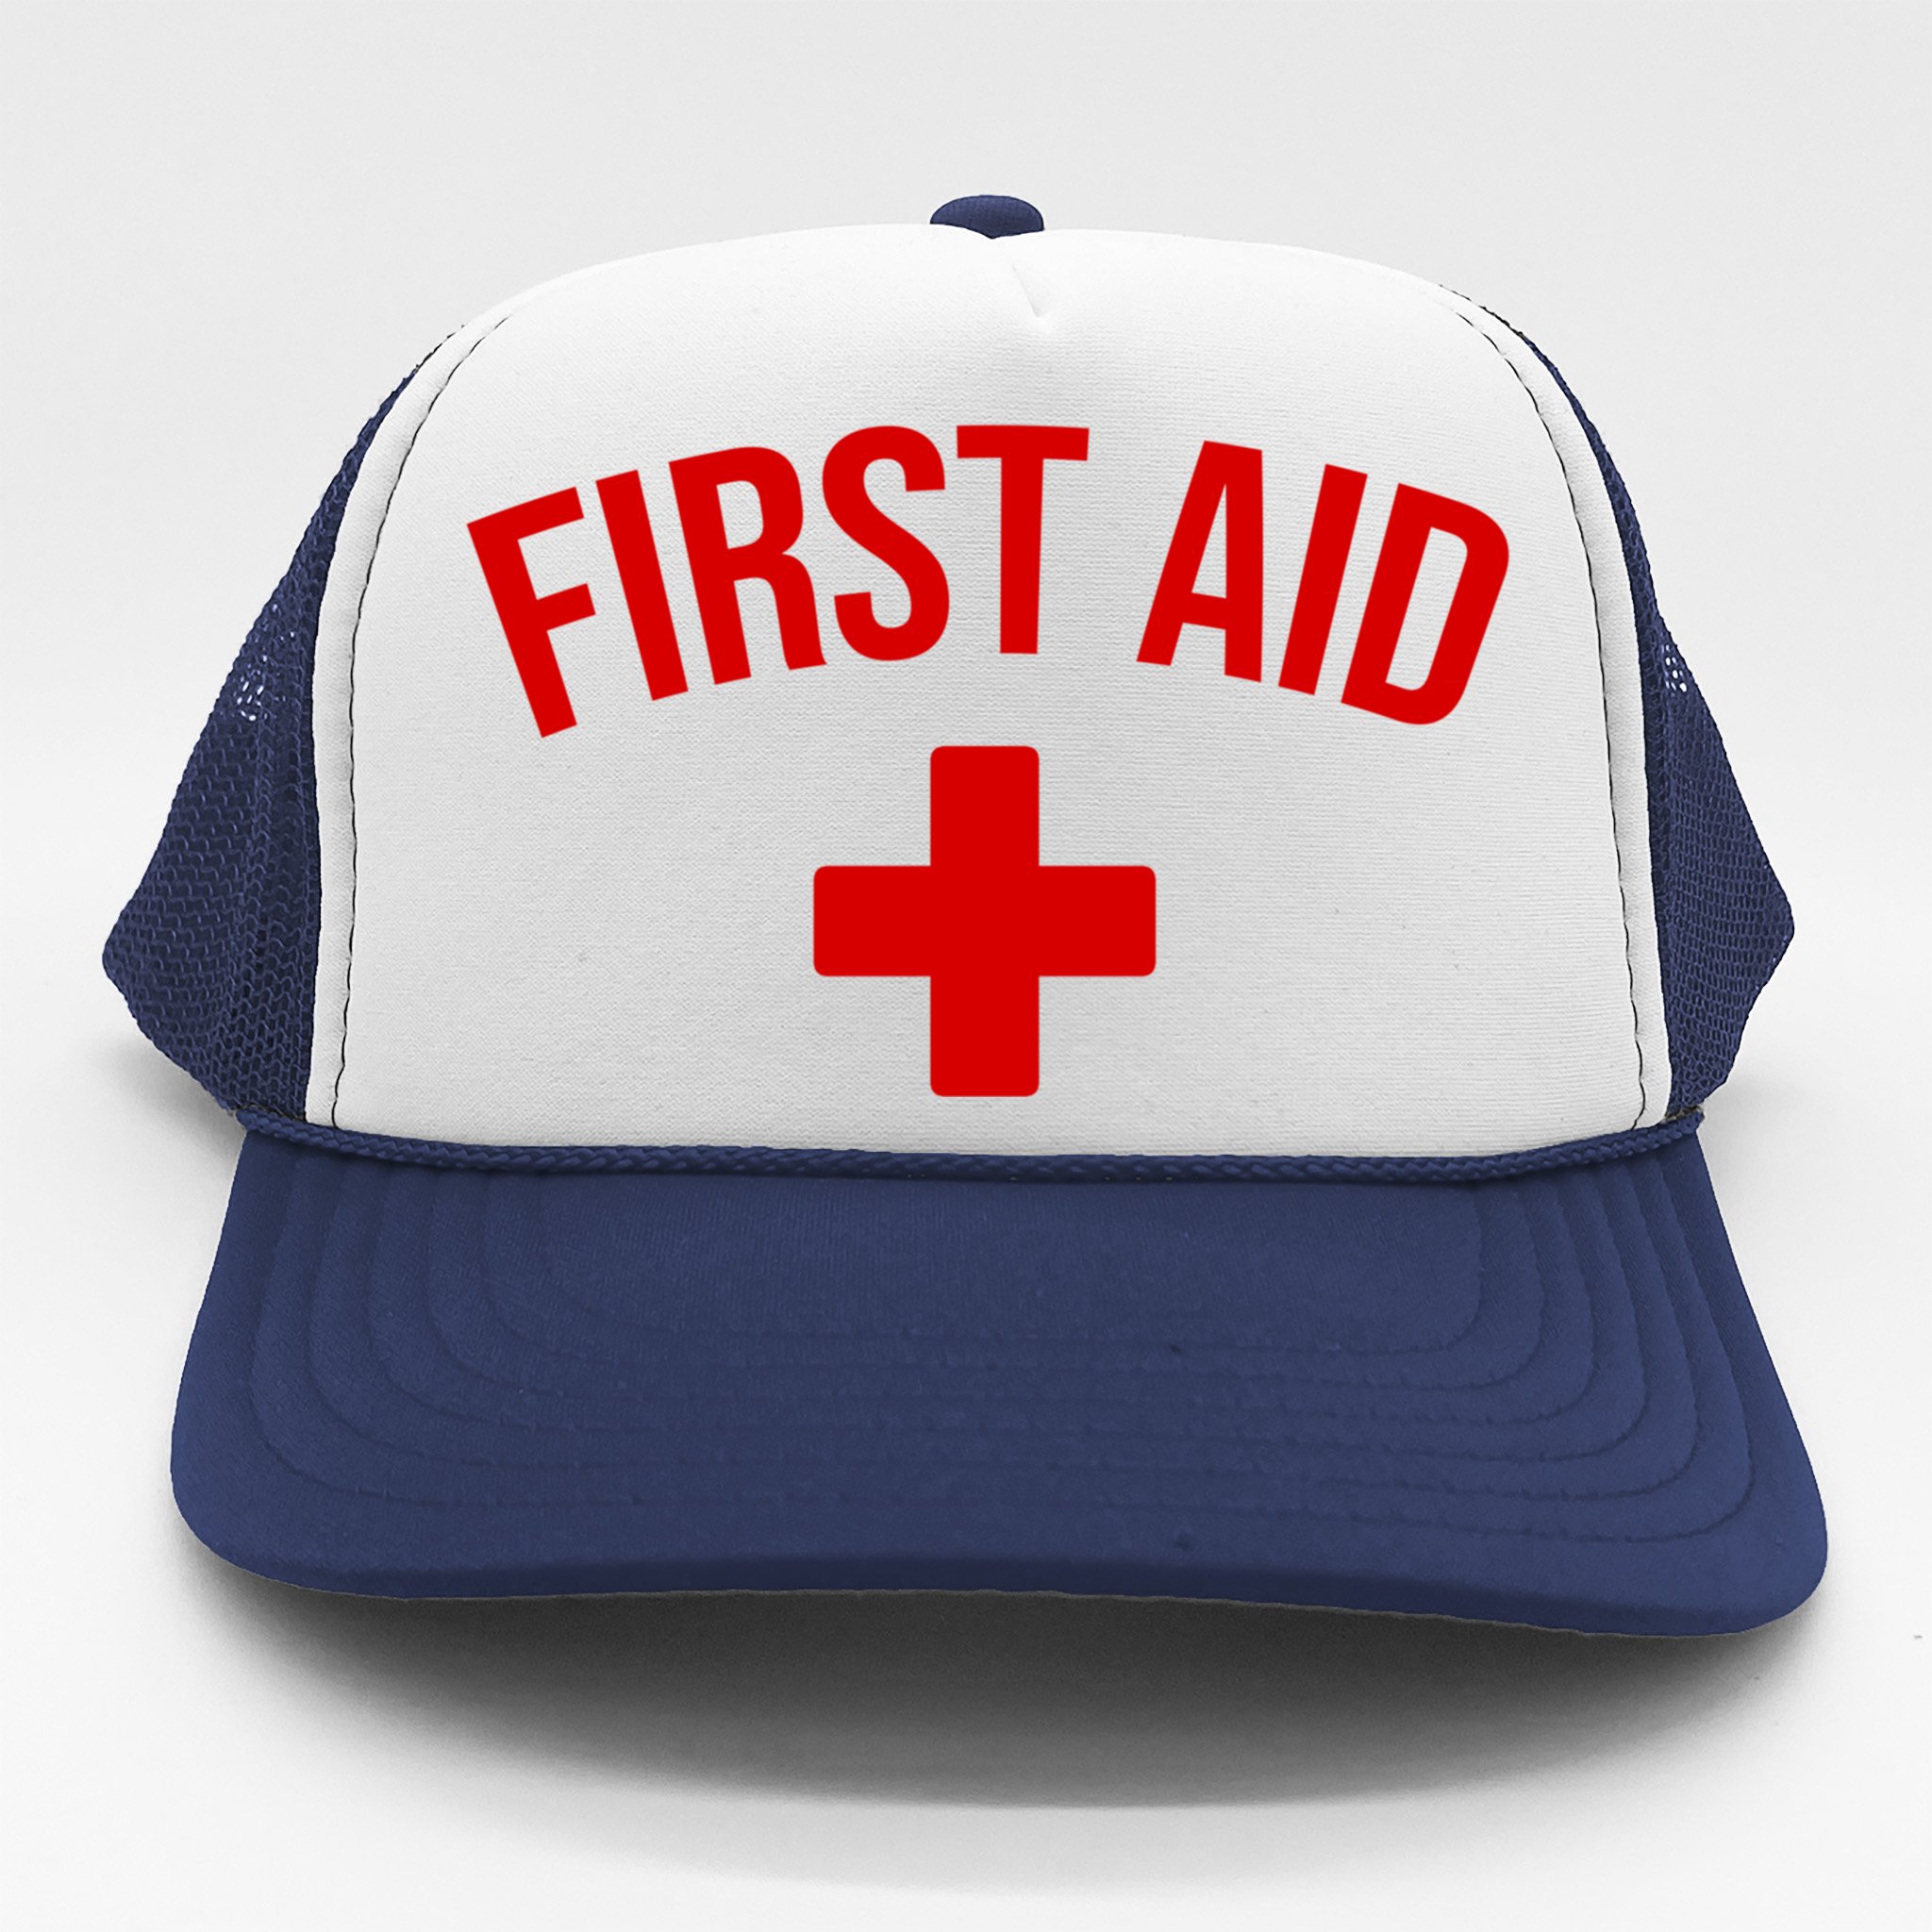 Baseball Cap with First Aid Cross